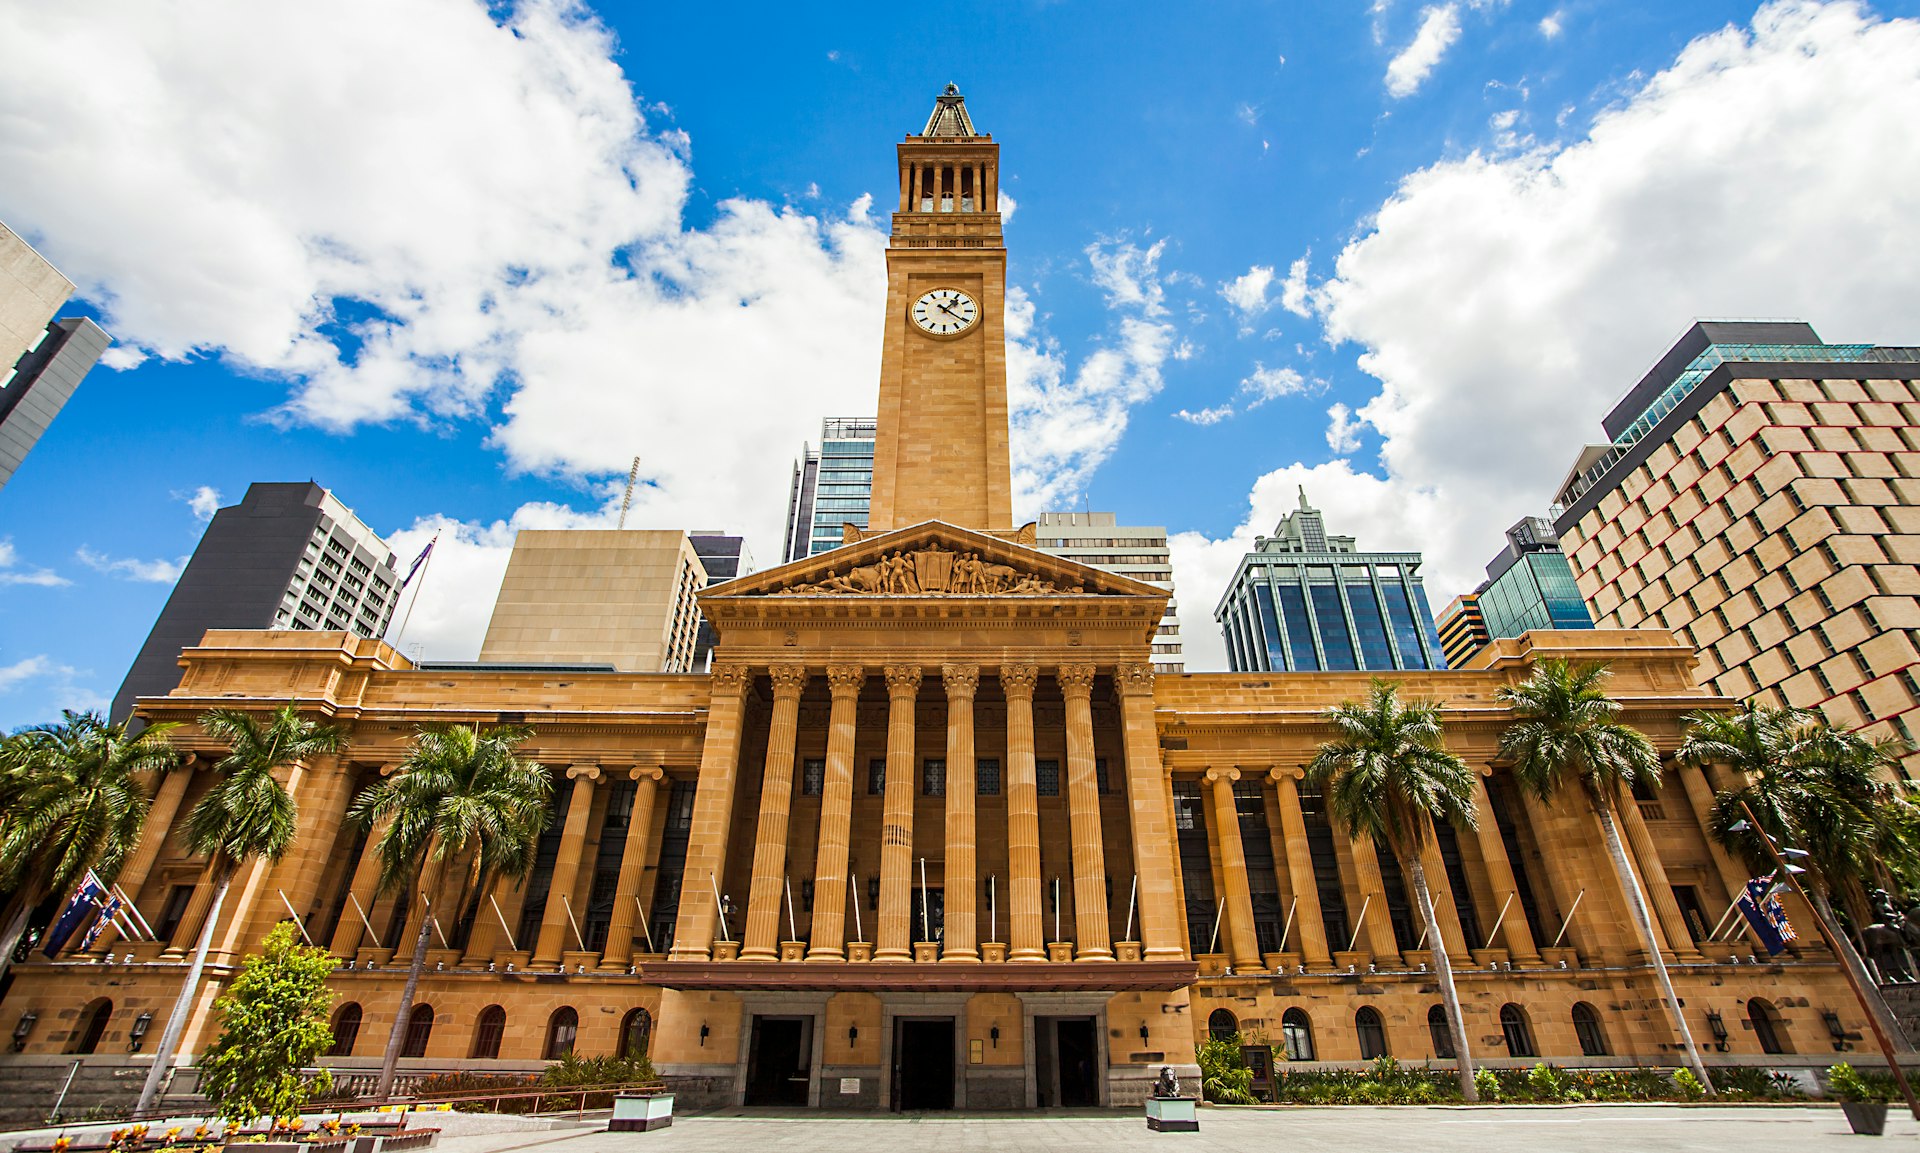 City Hall in Brisbane Australia from King George Square 